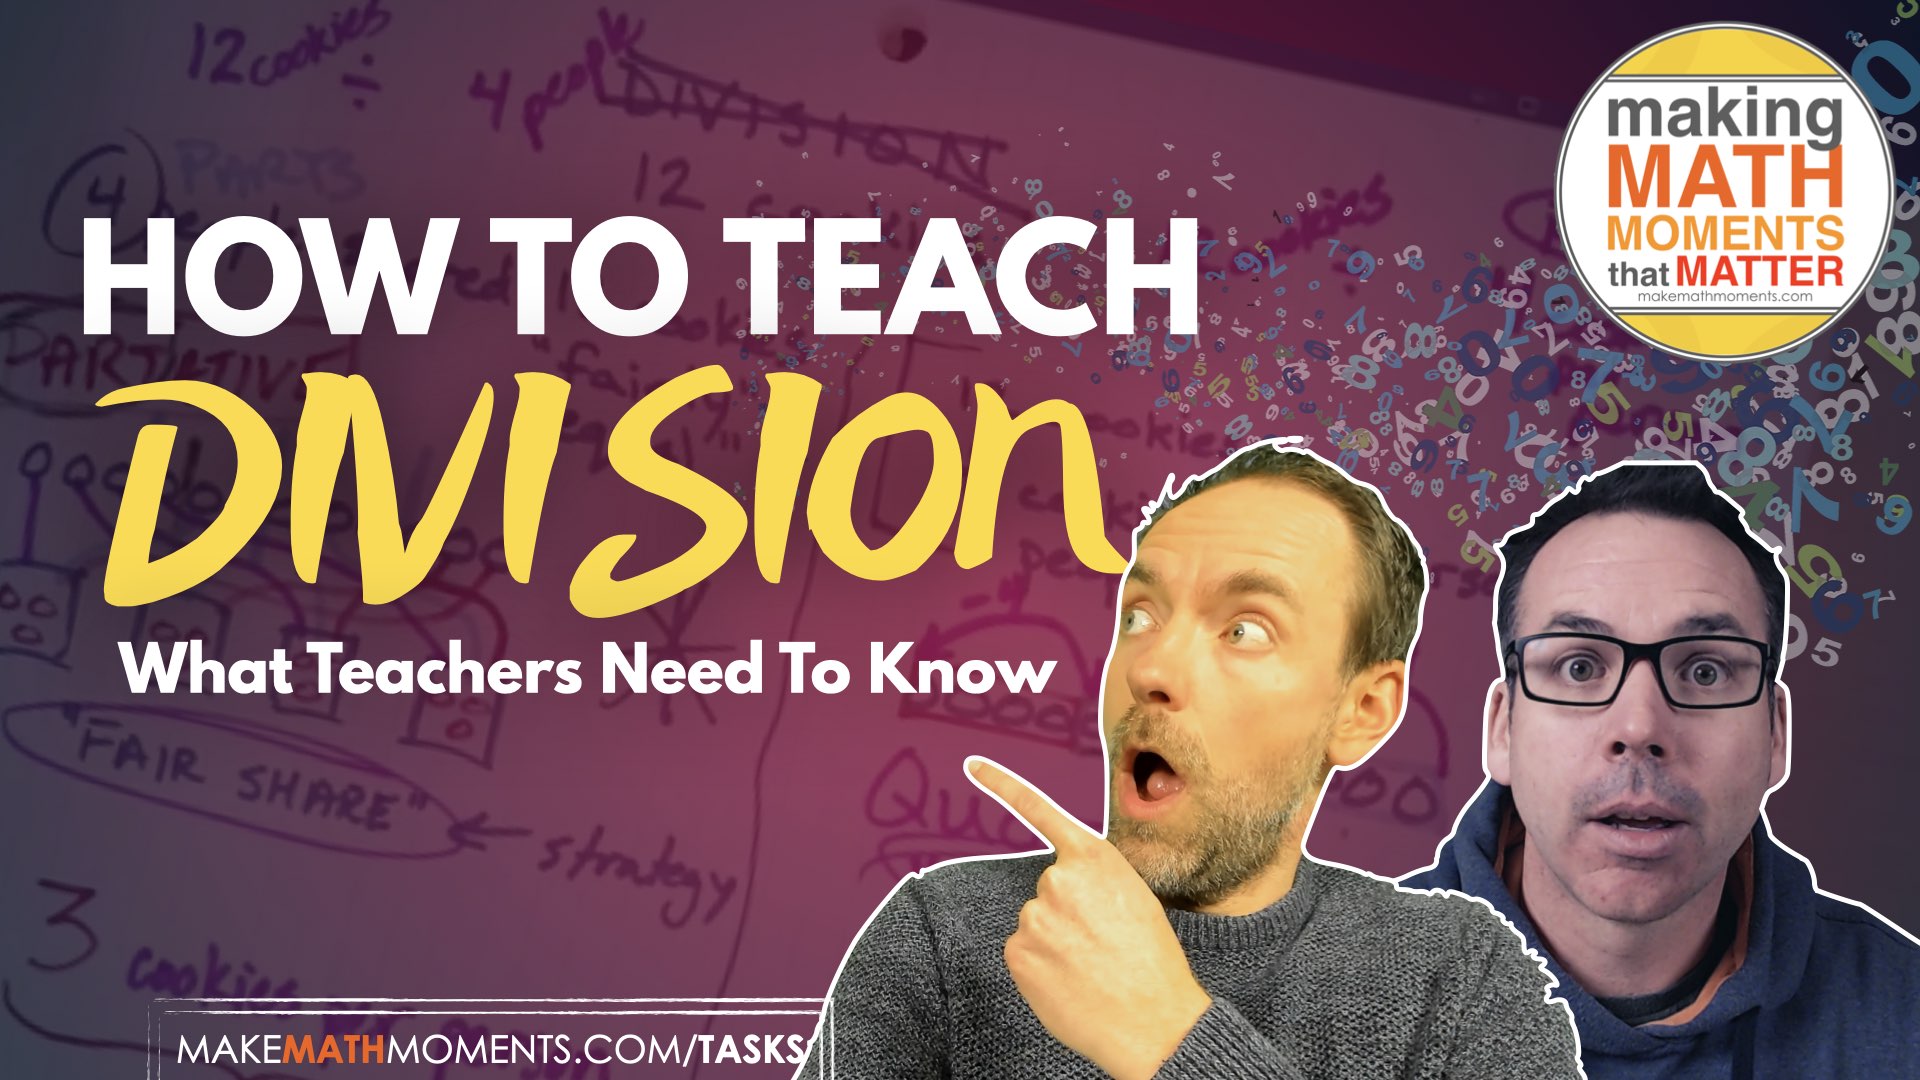 Teaching Division: What Teachers Need To Know